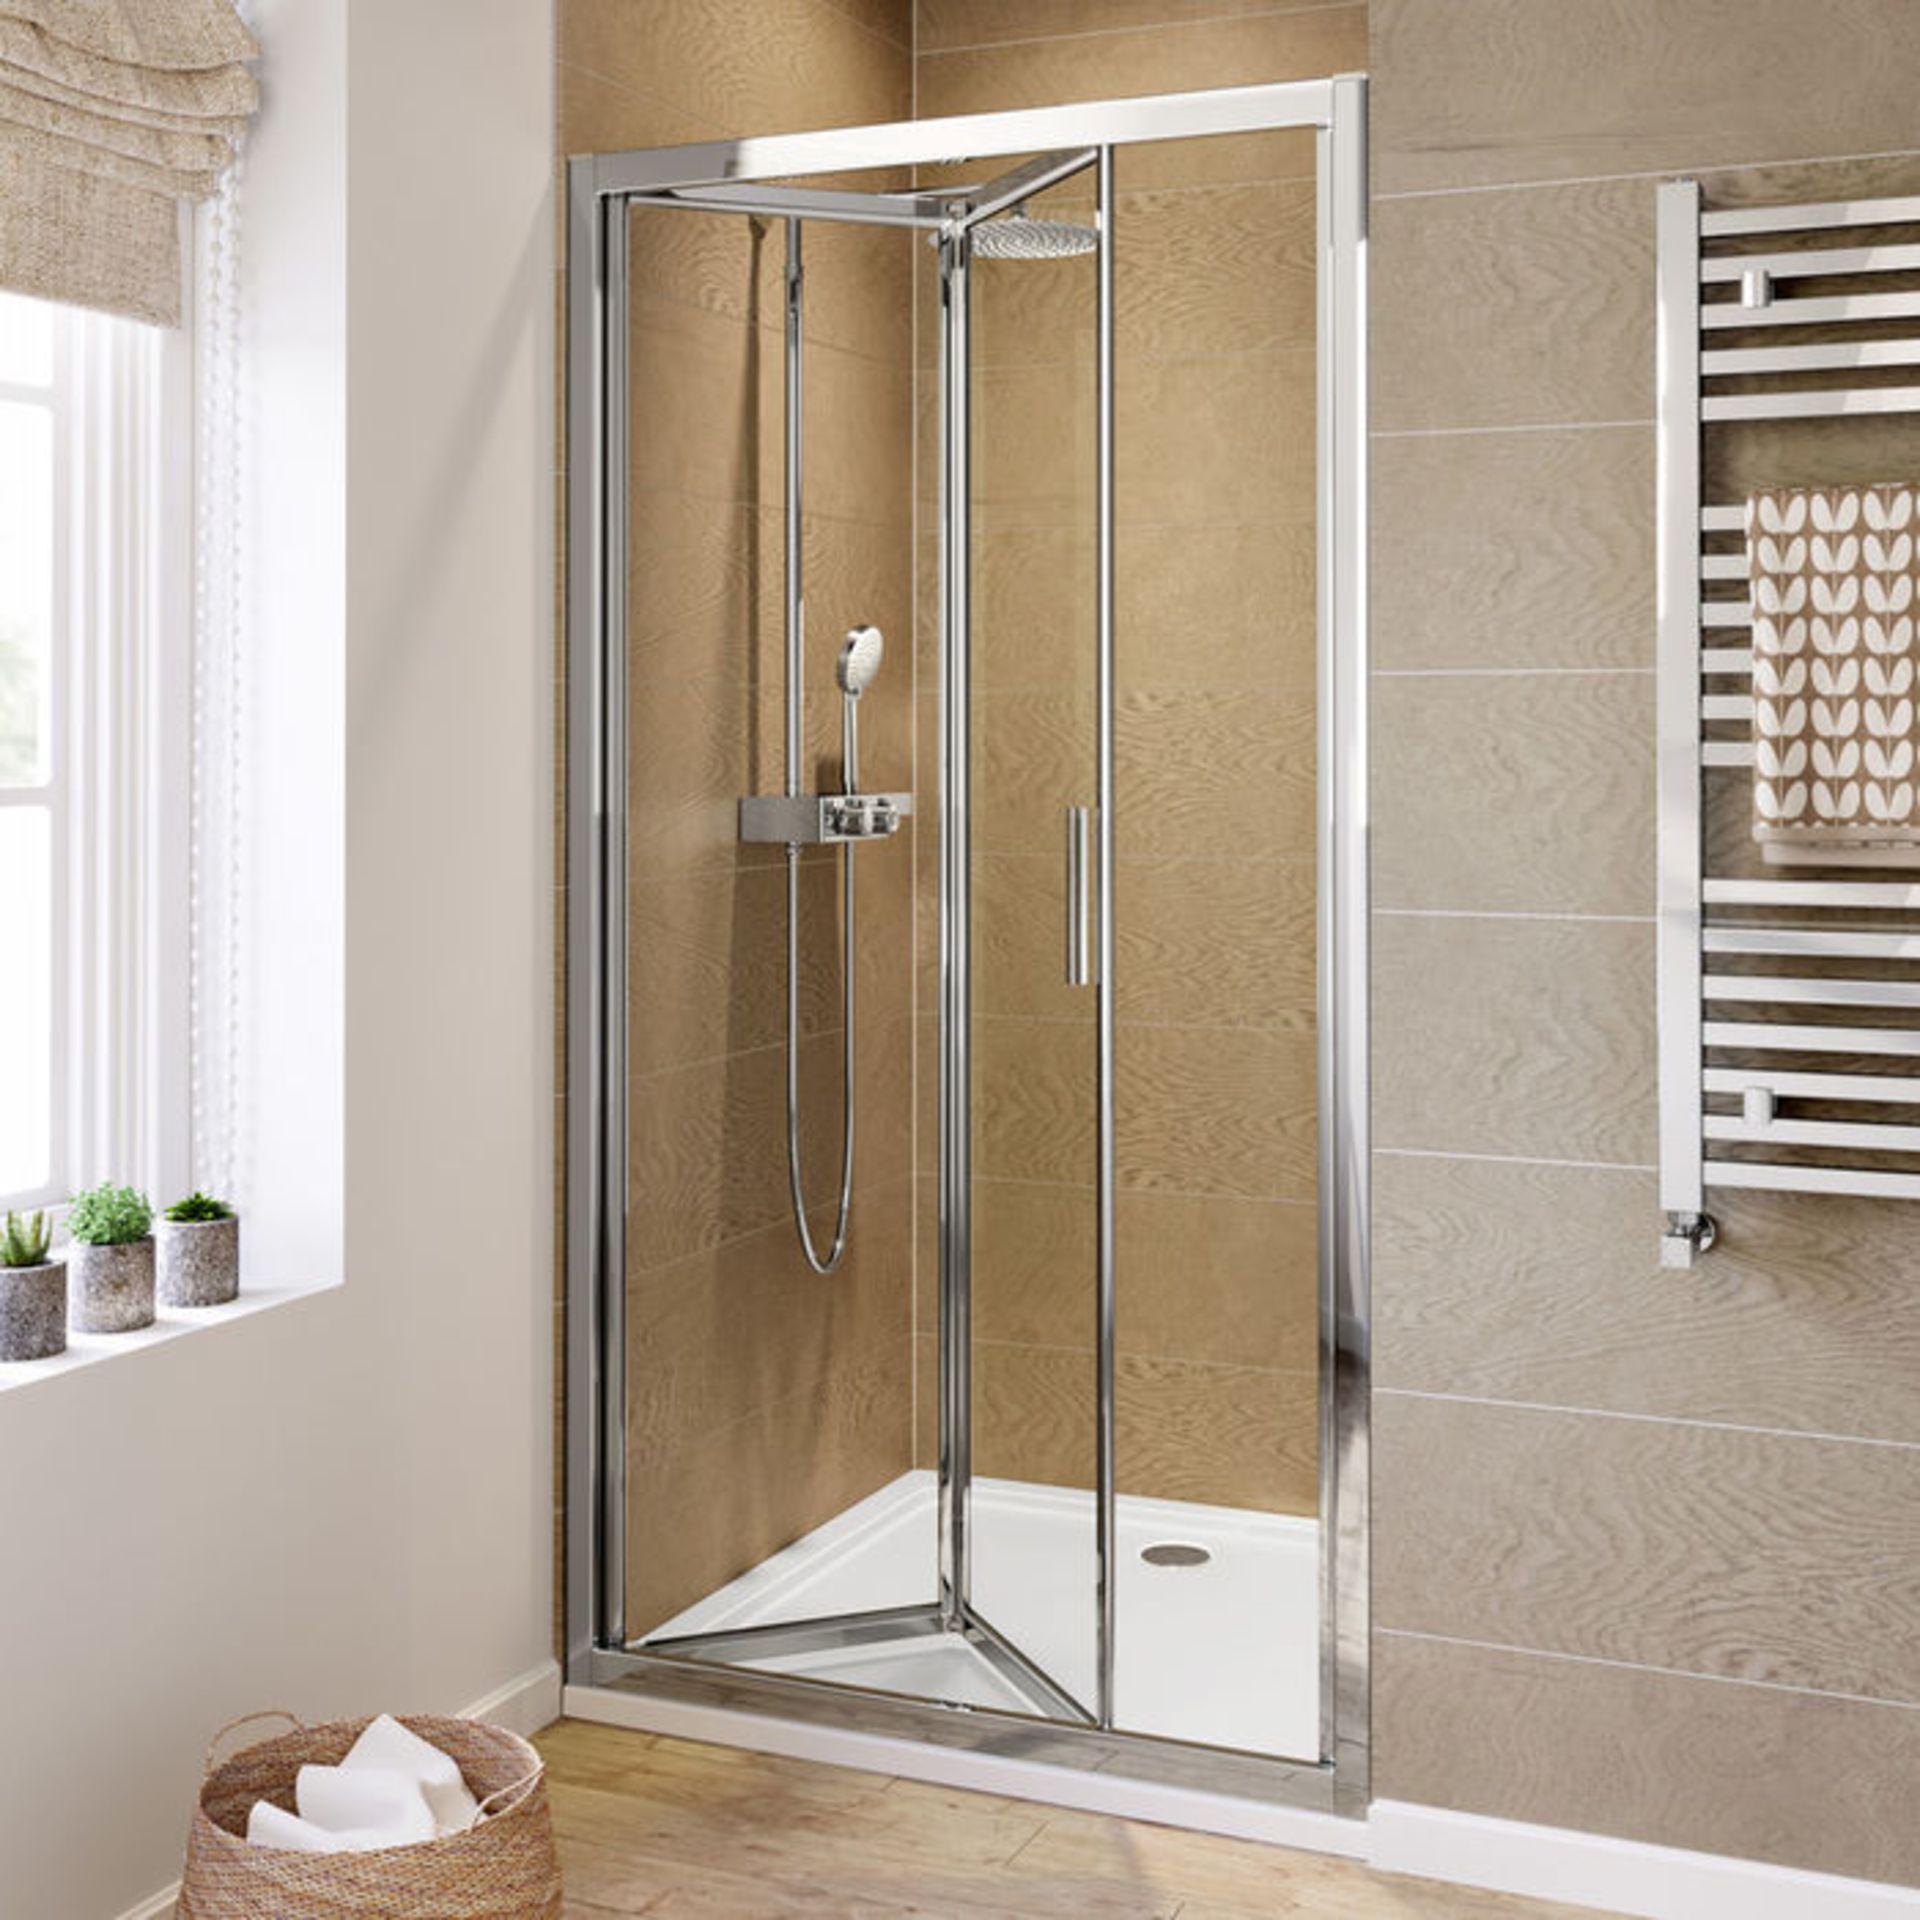 (ZA215) 1000mm - 6mm - Elements EasyClean Bifold Shower Door. RRP £239.99. 6mm Safety Glass - - Image 2 of 5